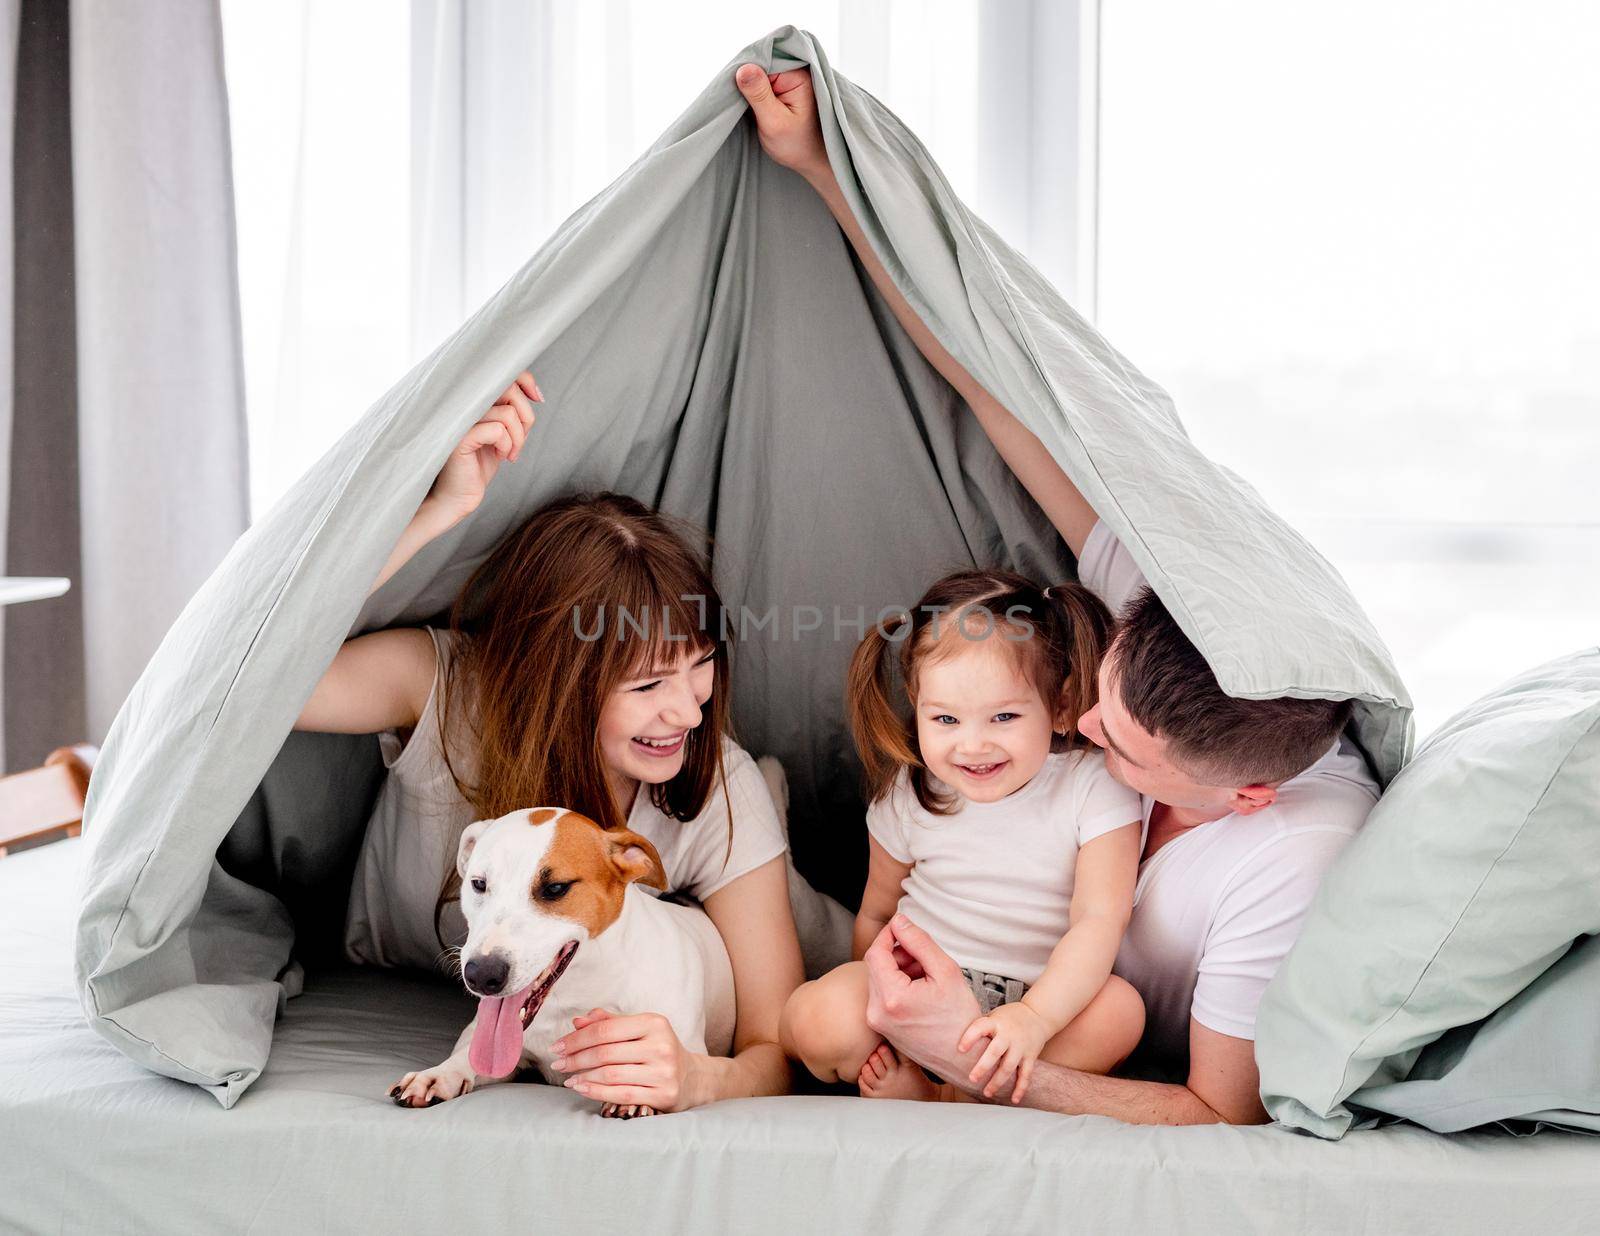 Smiling family with dog under the blanket in the bed. Beautiful morning moments of mother, father and little daughter with pet under coverlet. Young mom and dad looking at their kid